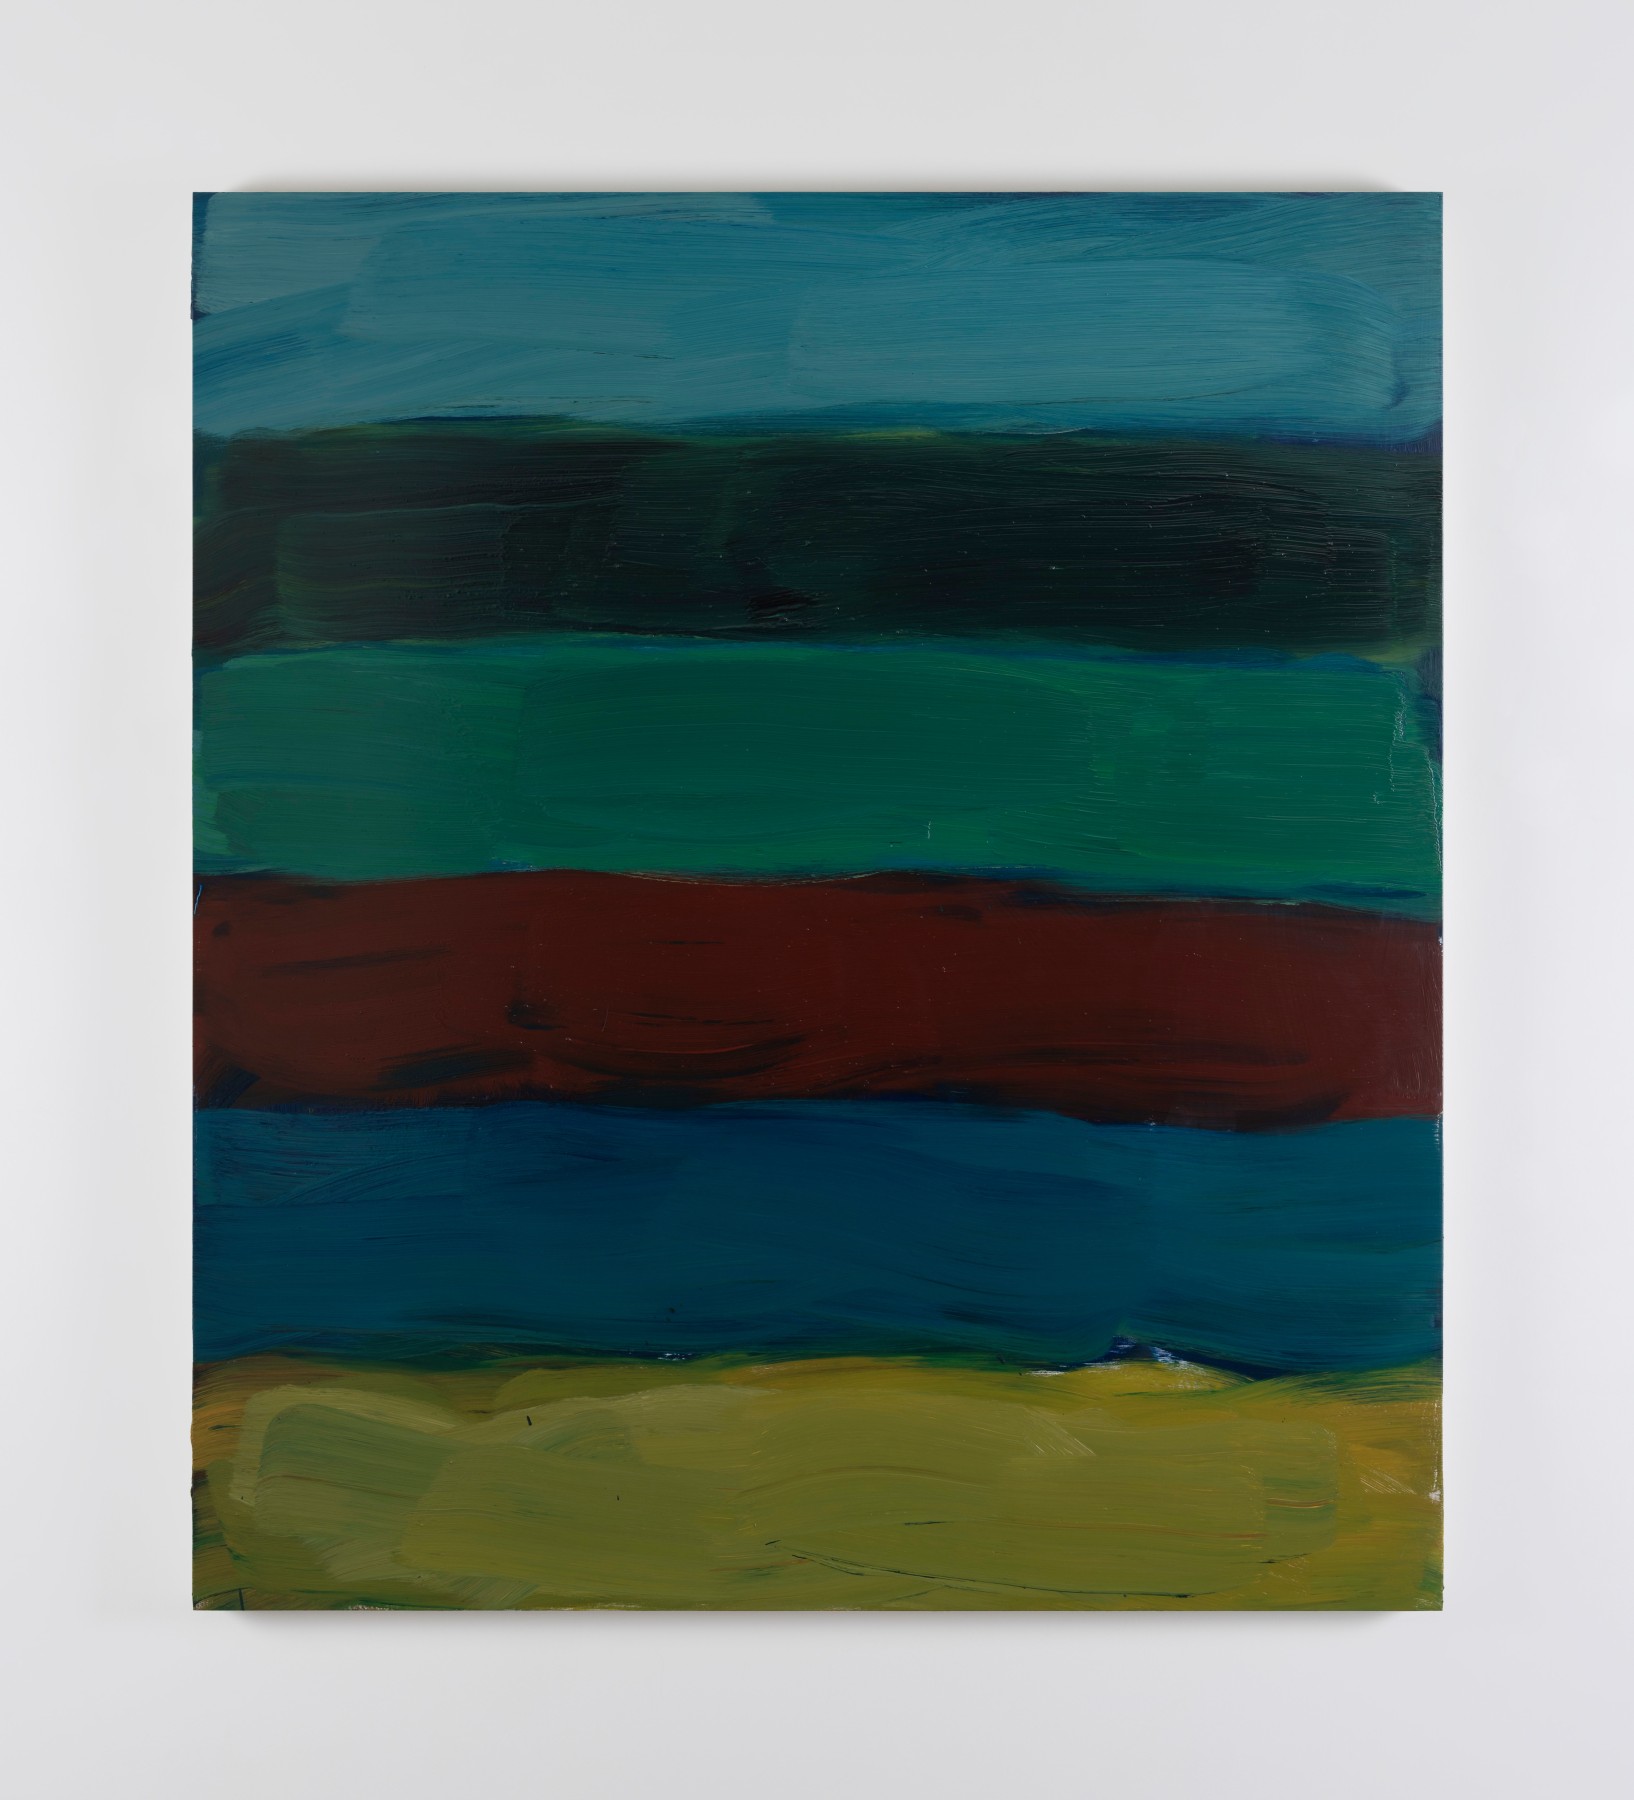 Sean Scully, Landline Green Yellow, 2024, oil on aluminium, 152.4 x 134.6 cm | like the light at the beginning of the world | Friday 12 April – Saturday 18 May 2024 | Kerlin Gallery | Image: Sean Scully, Landline Green Yellow, 2024, oil on aluminium, 152.4 x 134.6 cm  | the canvas is slightly taller than it is wide; there are six horizontal lines of paint on it (over underpainting); their colours are, roughly, medium greyish blue, steely black, gentle grey-green, burgundy, darkish mid-blue, lemony yellow 